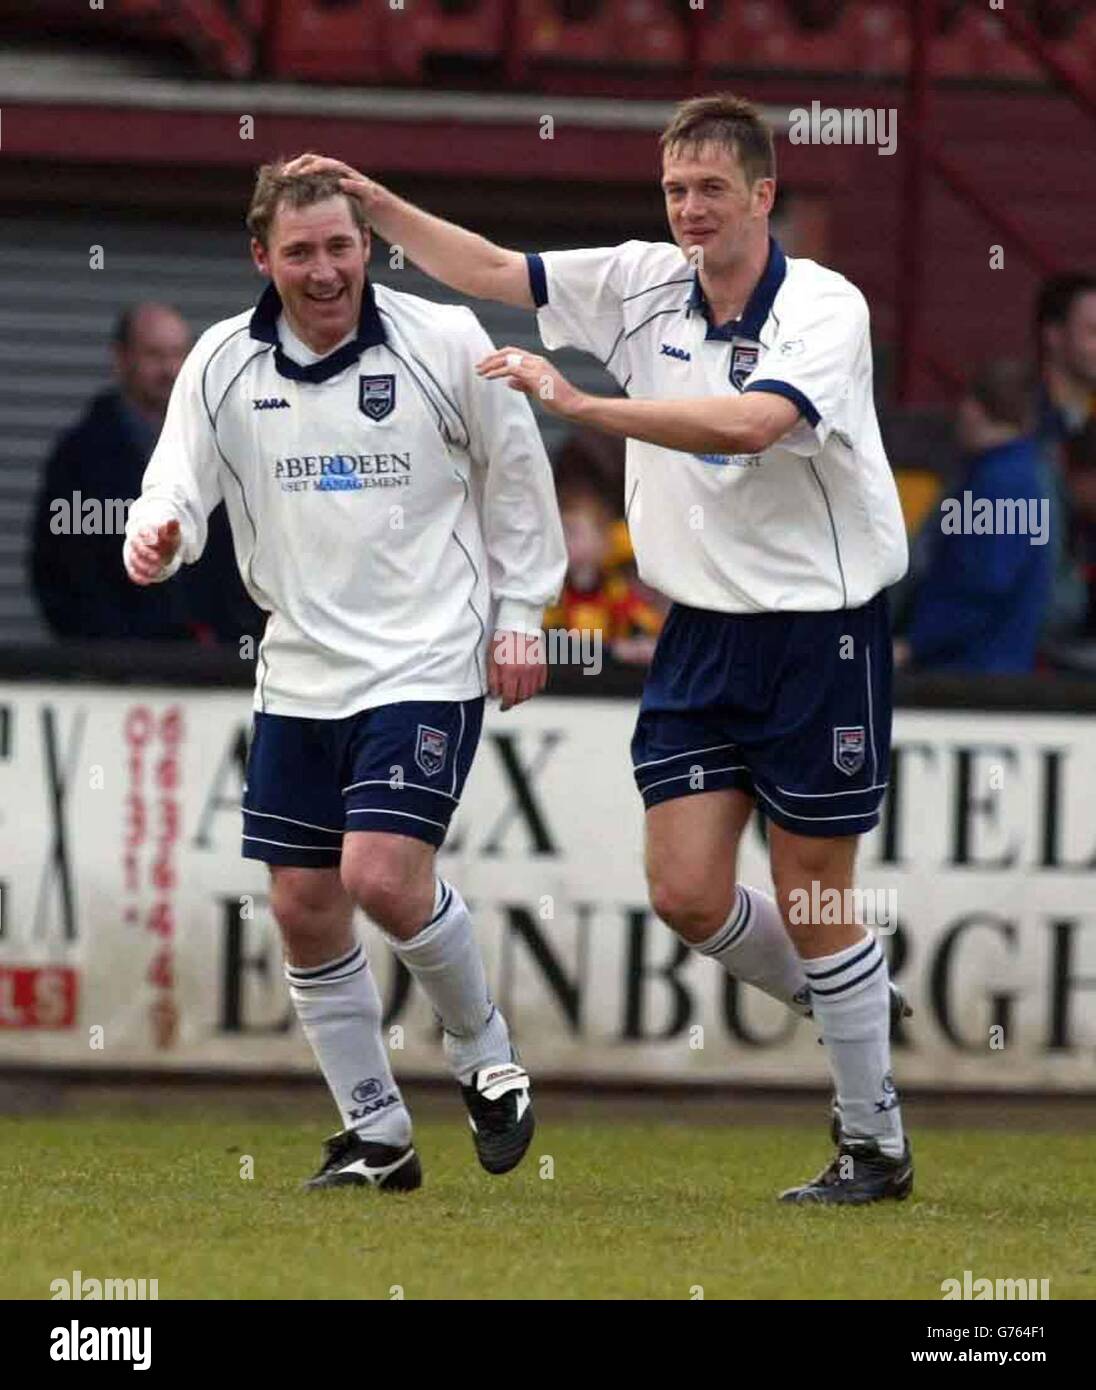 Ross County's Hugh Robertson (left) celebrates with teammate Ian Maxwell, during the Bells Scottish League Division One match at Partick Thistle's Firhill Park ground, Saturday March 30th, 2002. Final score Partick Thistle 1 v Ross County 1. PA Photos. Stock Photo